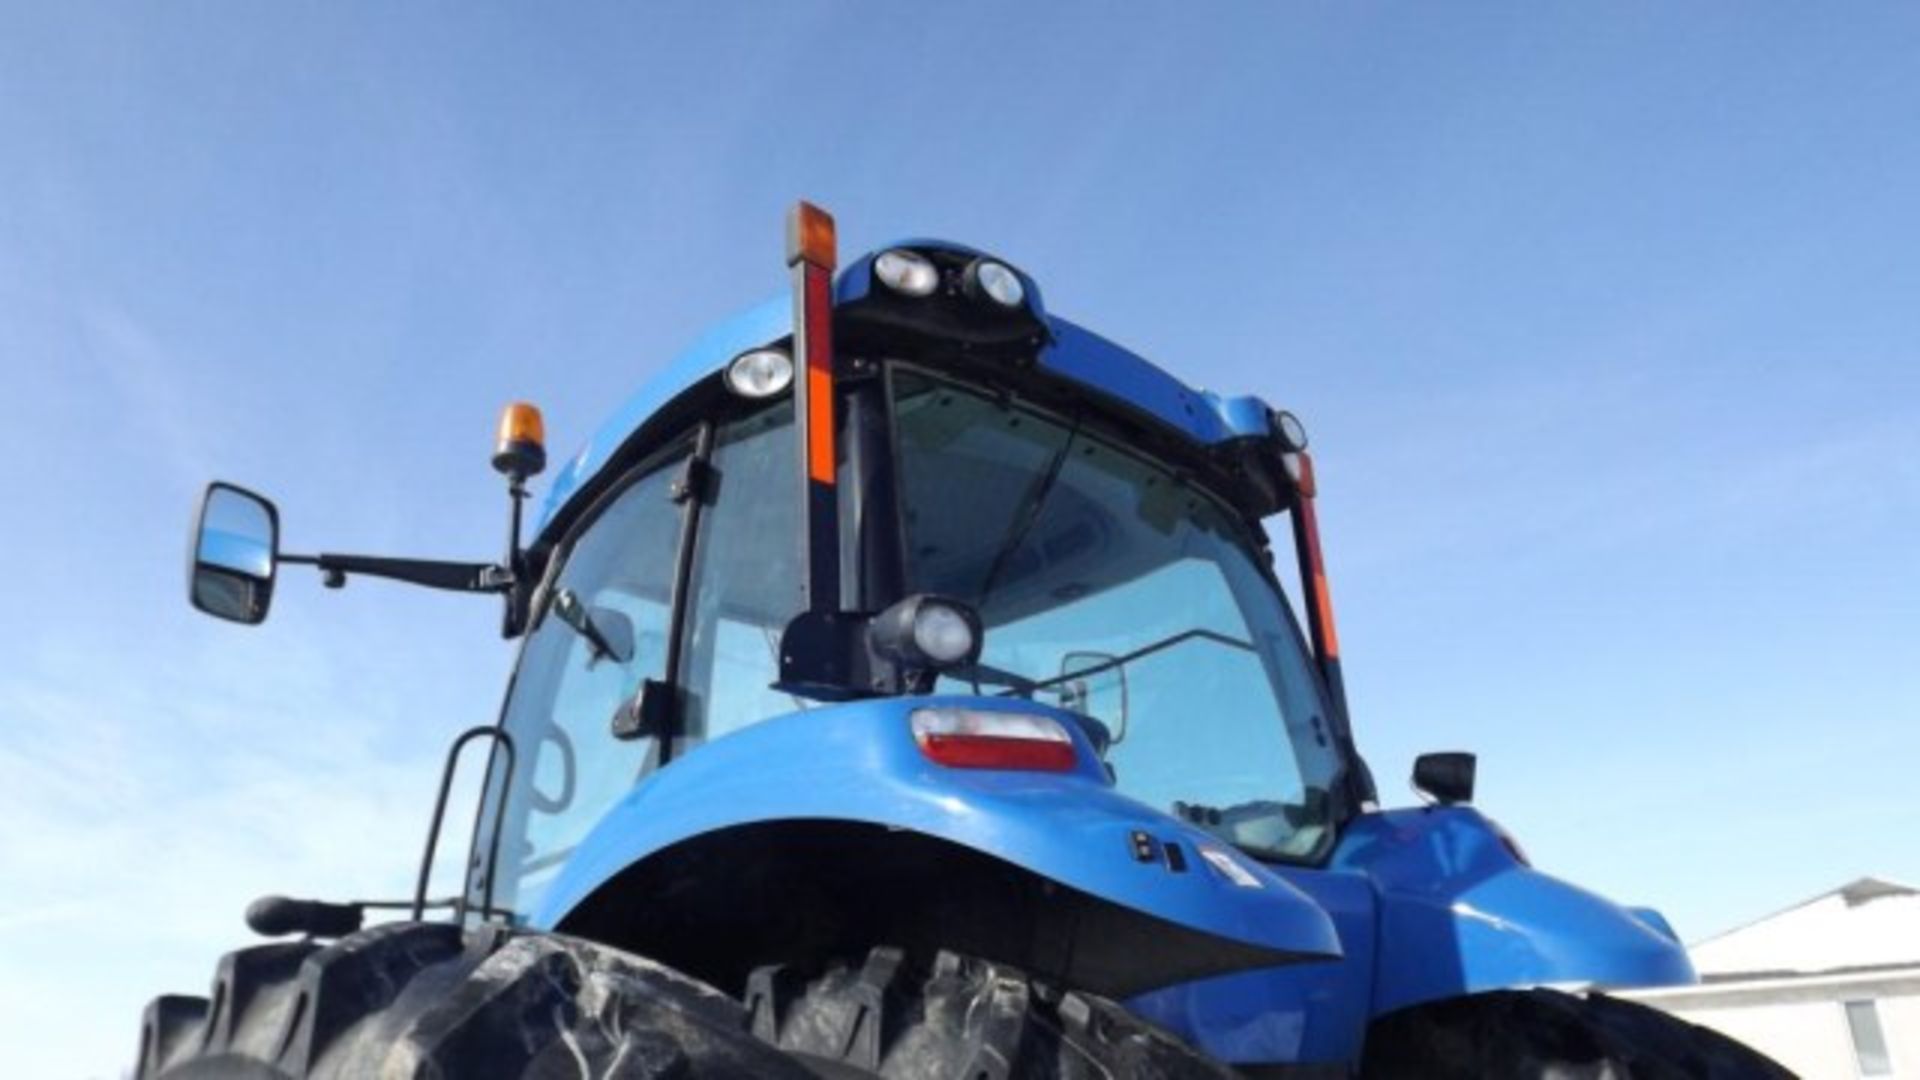 New Holland T8.330 Tractor '12, sn#ZBRC08592 1192 Hrs, MFWD, Deluxe Cab, Buddy Seat, 280 HP, 18/4 - Image 17 of 19